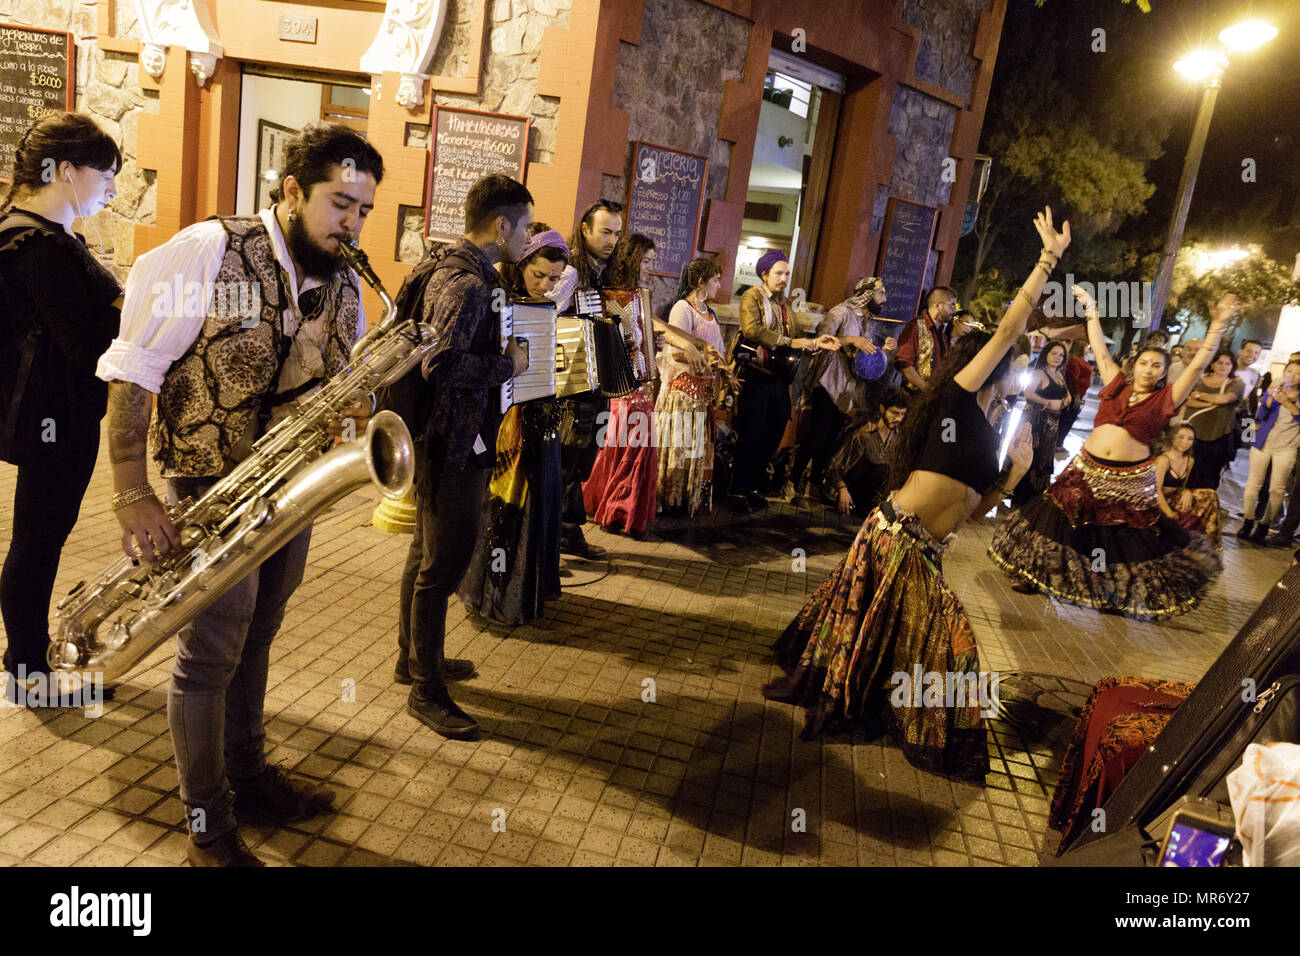 Lastarria, Santiago, Chile: A street band plays and dances to gypsy music. Stock Photo